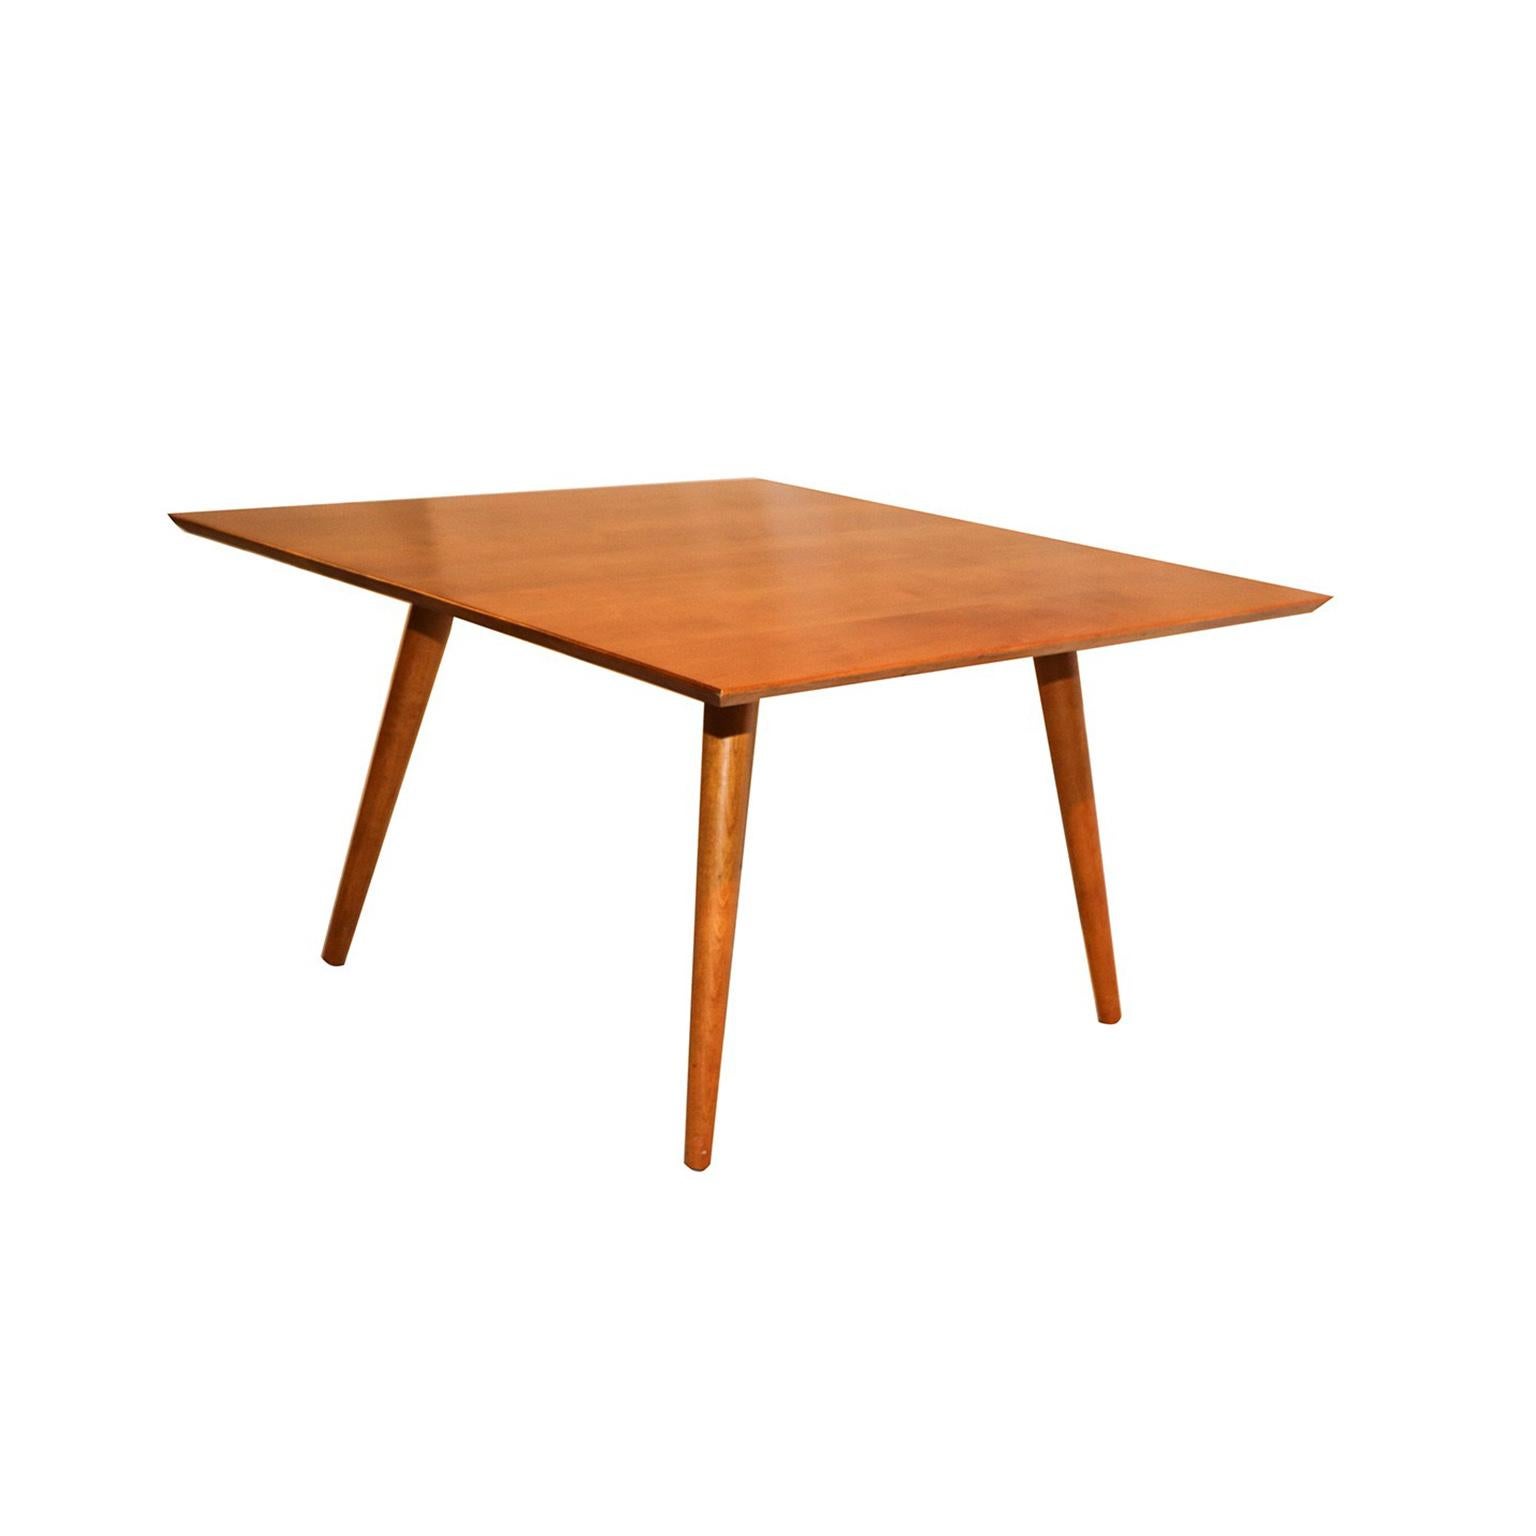 Original, handsome, Classic, midcentury coffee table designed by Paul McCobb for the Planner Group collection. Square table in maple with gently tapered legs and a slender profile. The top has the appearance of floating. Solid maple construction.